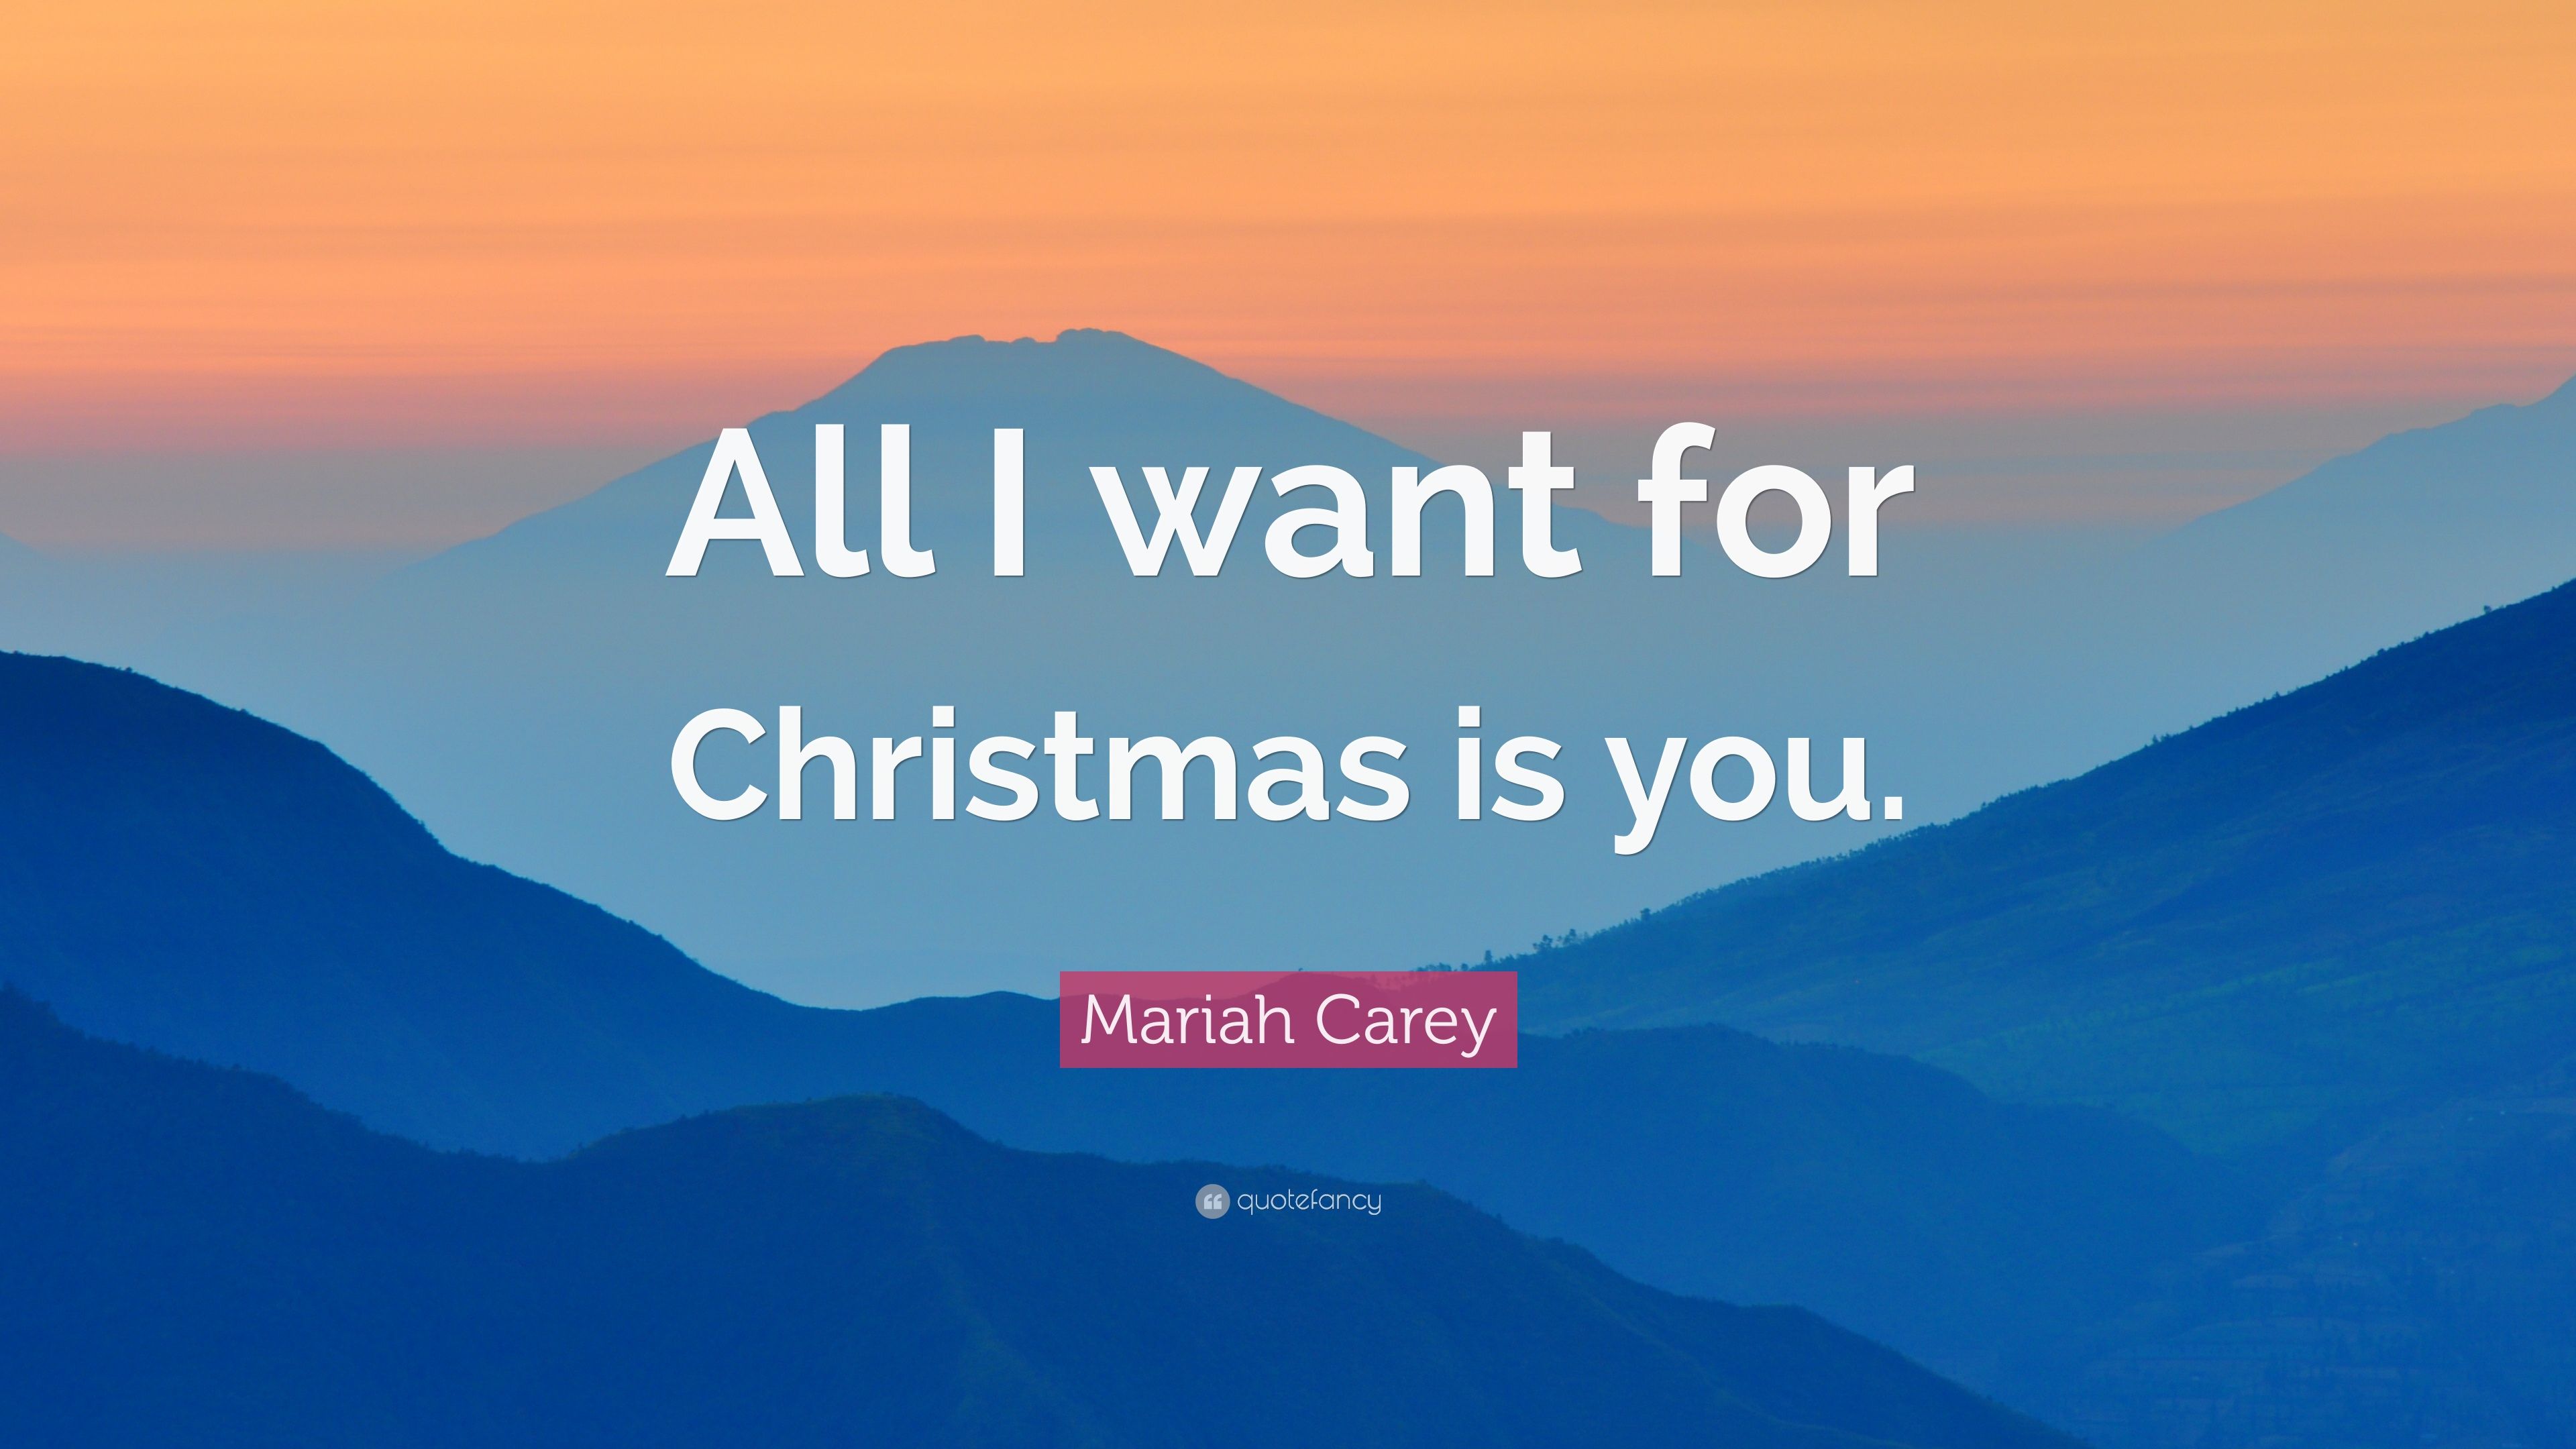 Mariah Carey Quote: “All I want for Christmas is you.” (15 wallpaper)